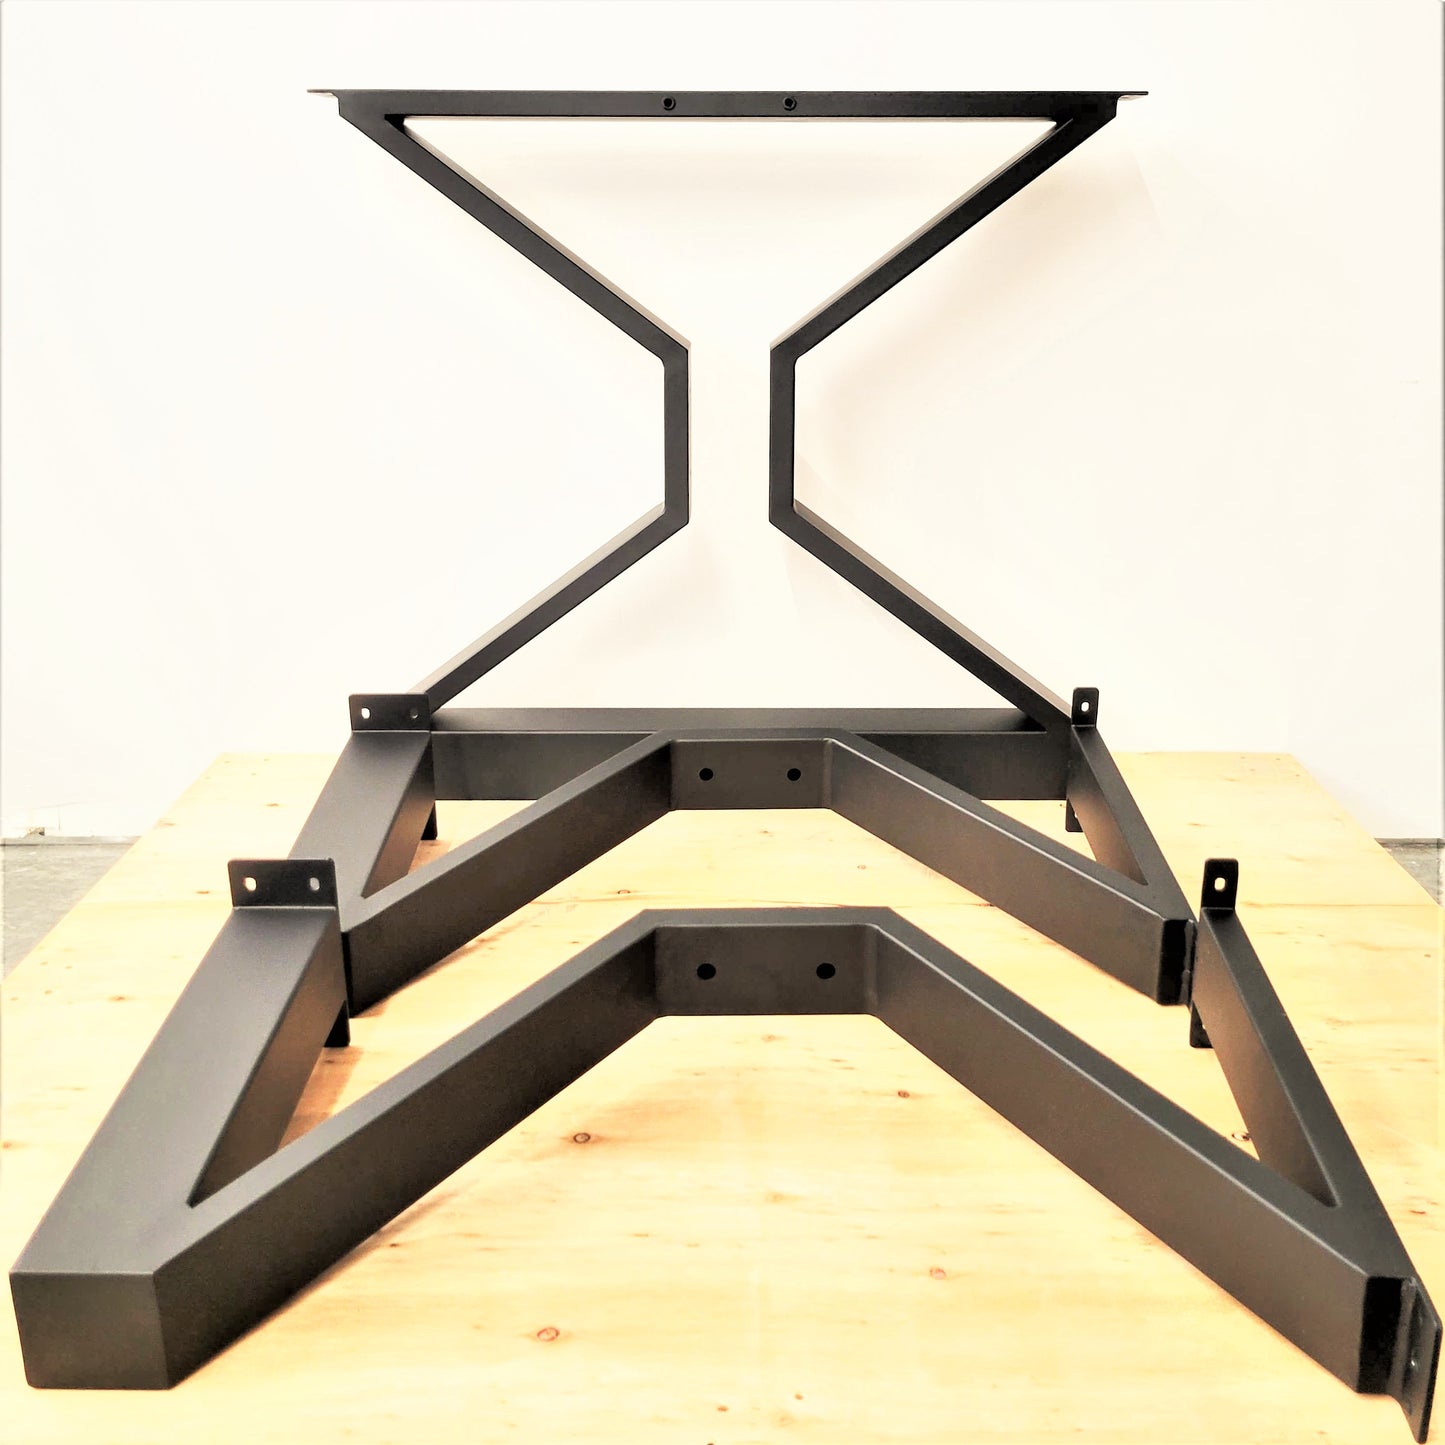 Round Coffee Table Legs, Spider Legs, Spider Shaped Legs, Furniture Legs, Table Base, Coffee Table Legs, Furniture Feet, Metal Legs, Steel Table Legs, Coffee Table Base, Metal Table Base, Pedestal Dining Table Legs